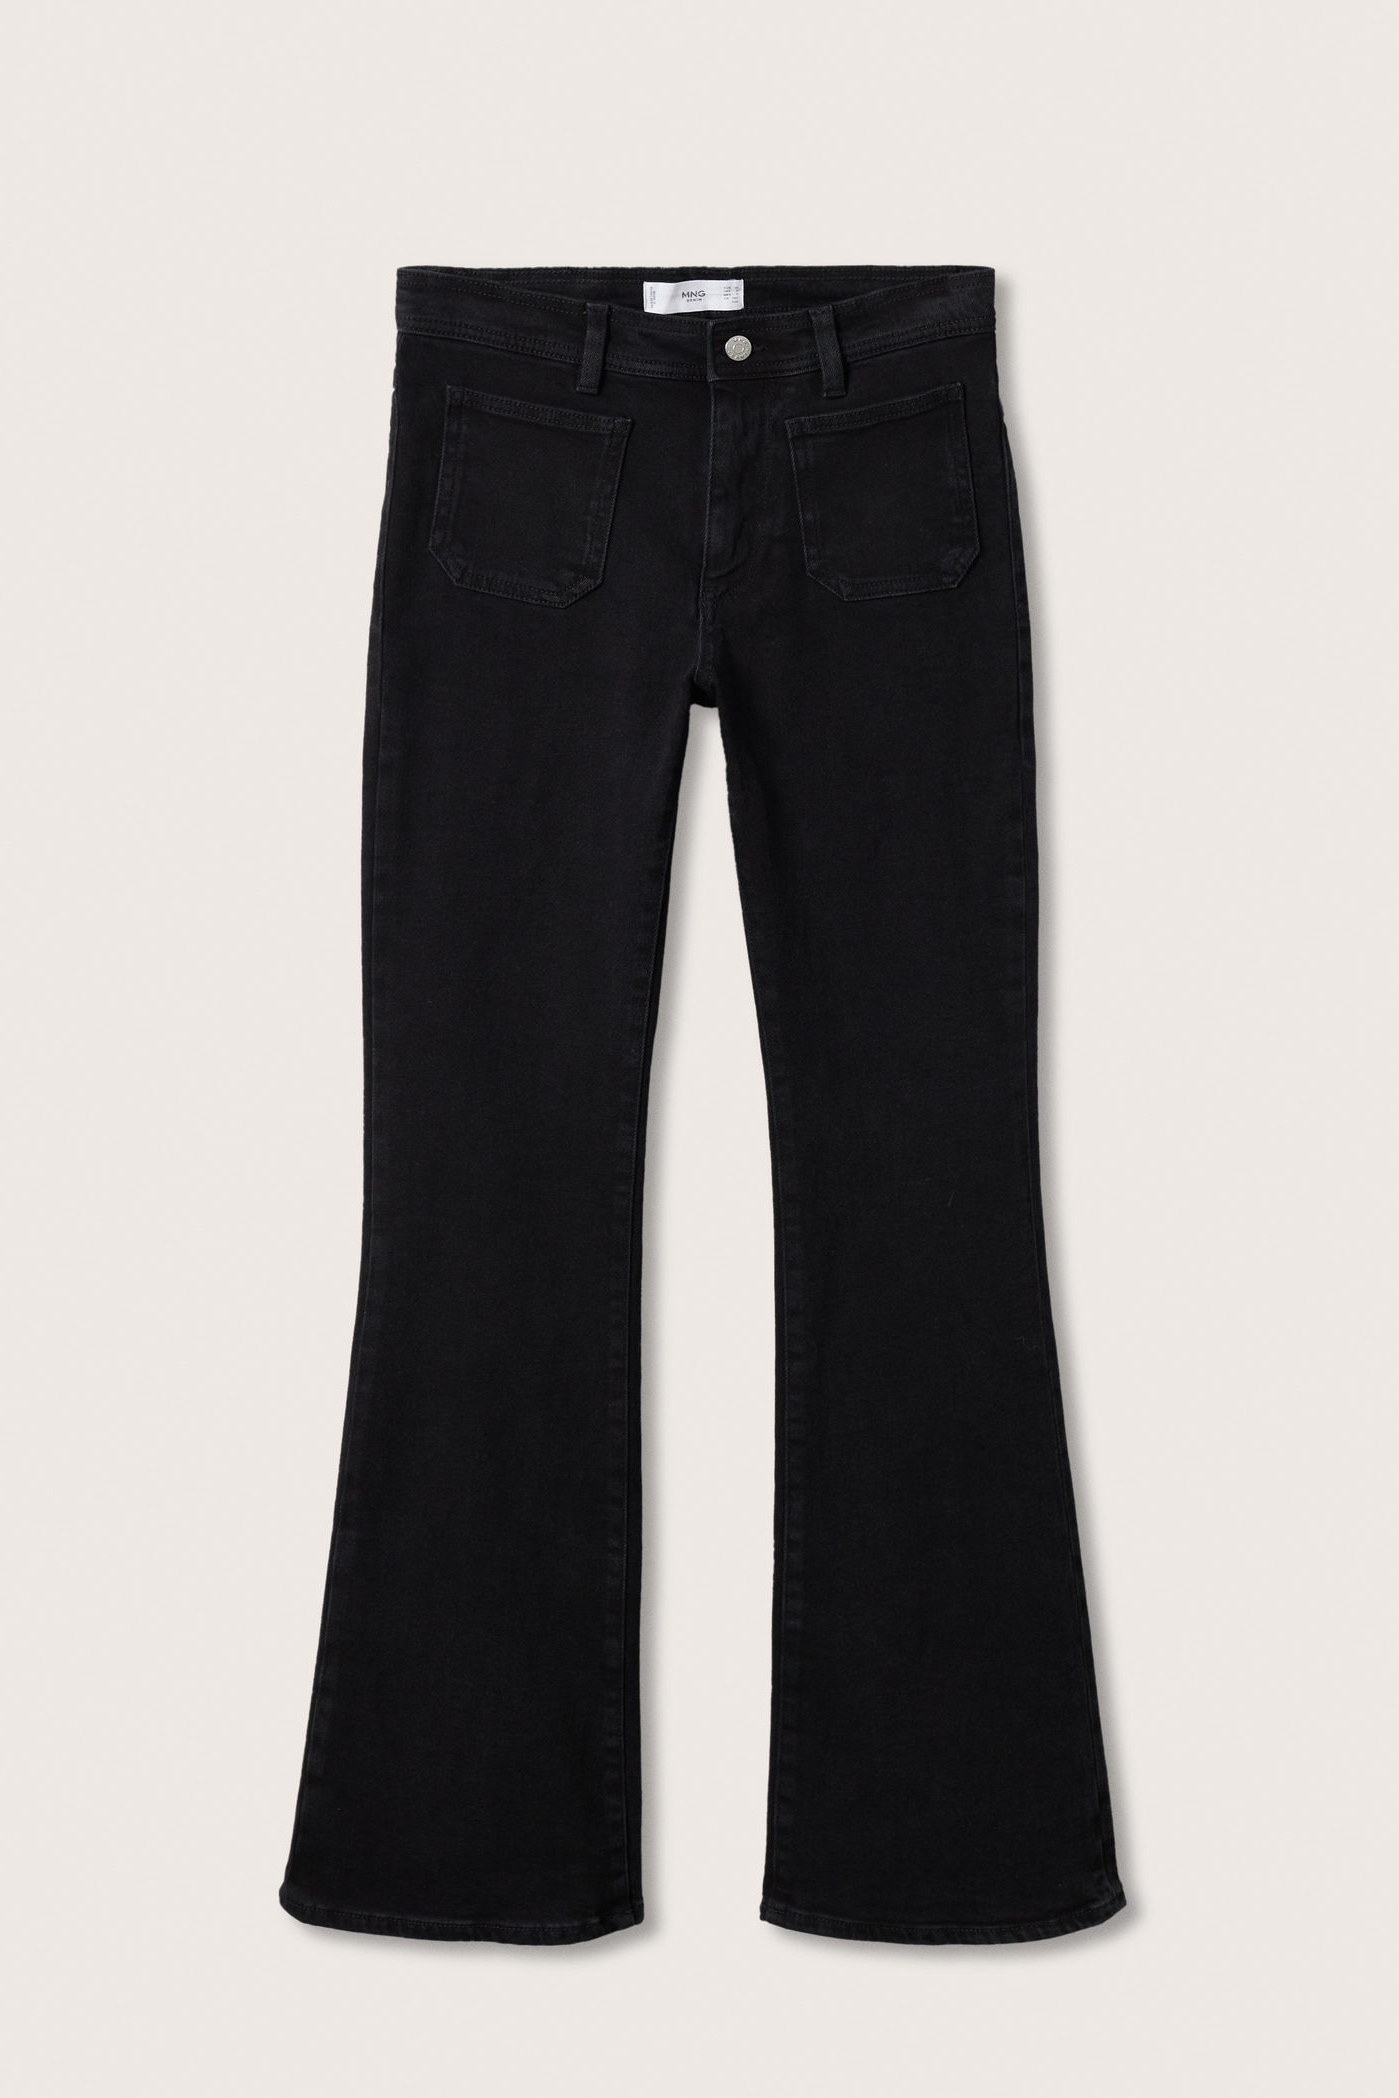 Women's High Rise Bootcut Jeans – Levis India Store